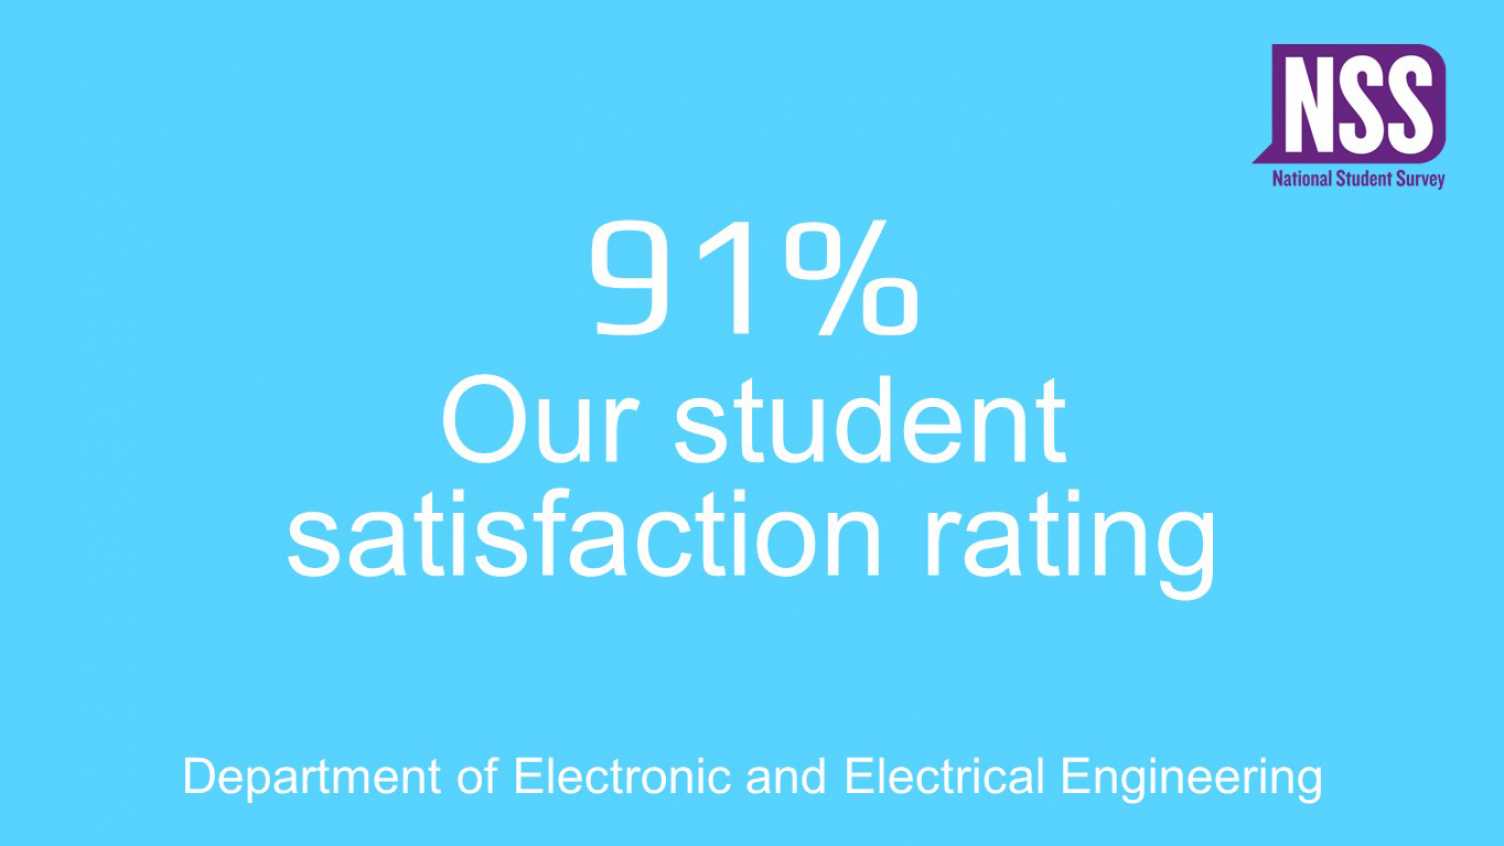 Thumbnail for EEE students deliver positive feedback in the latest National Student Survey | E…